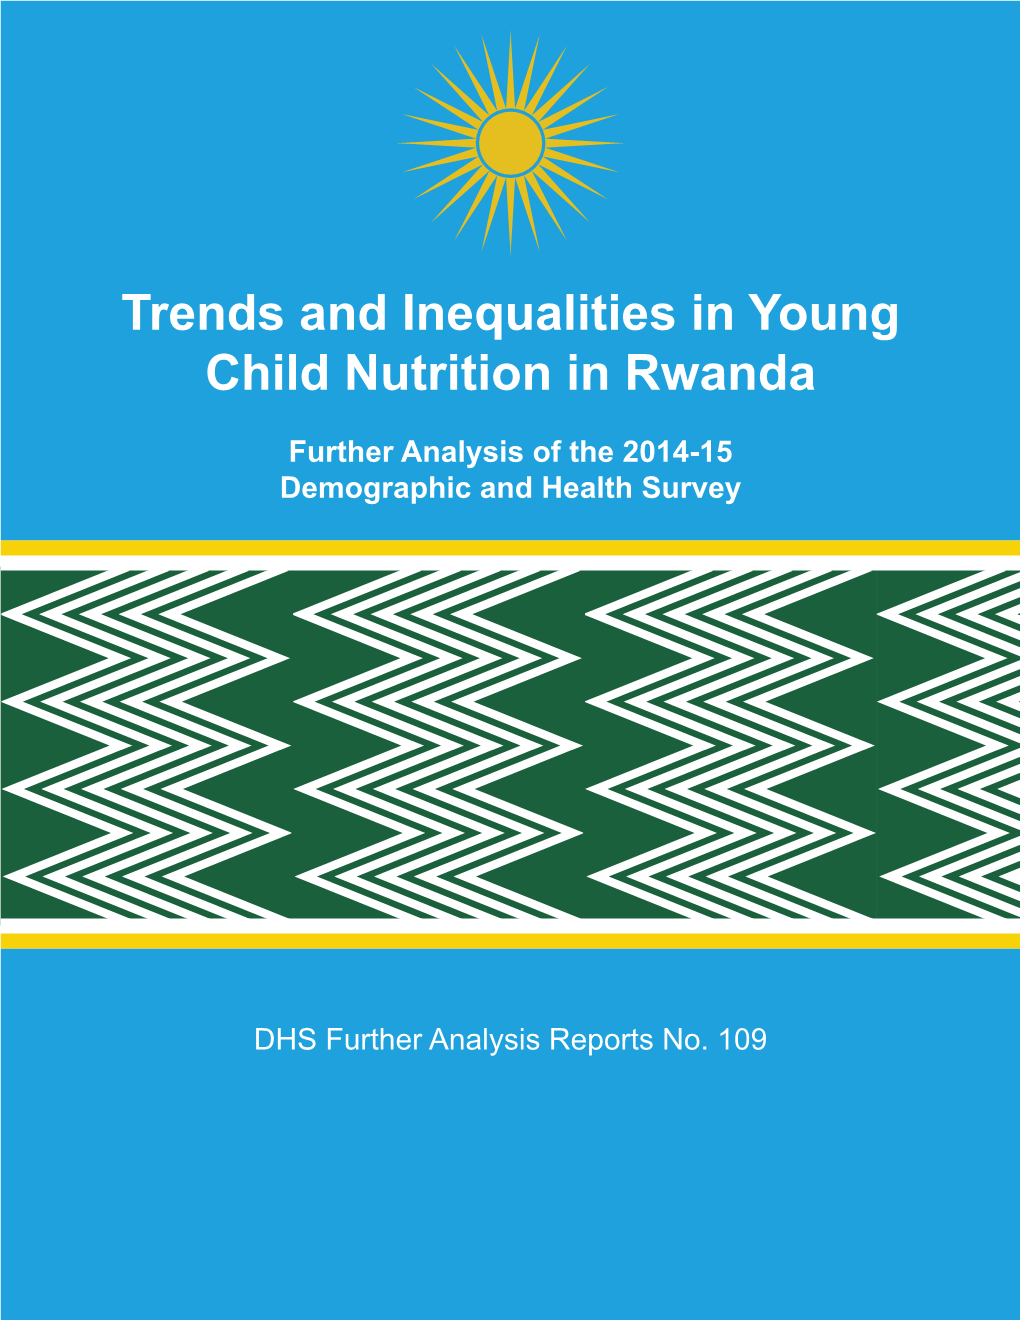 Trends and Inequalities in Young Child Nutrition in Rwanda [FA109]